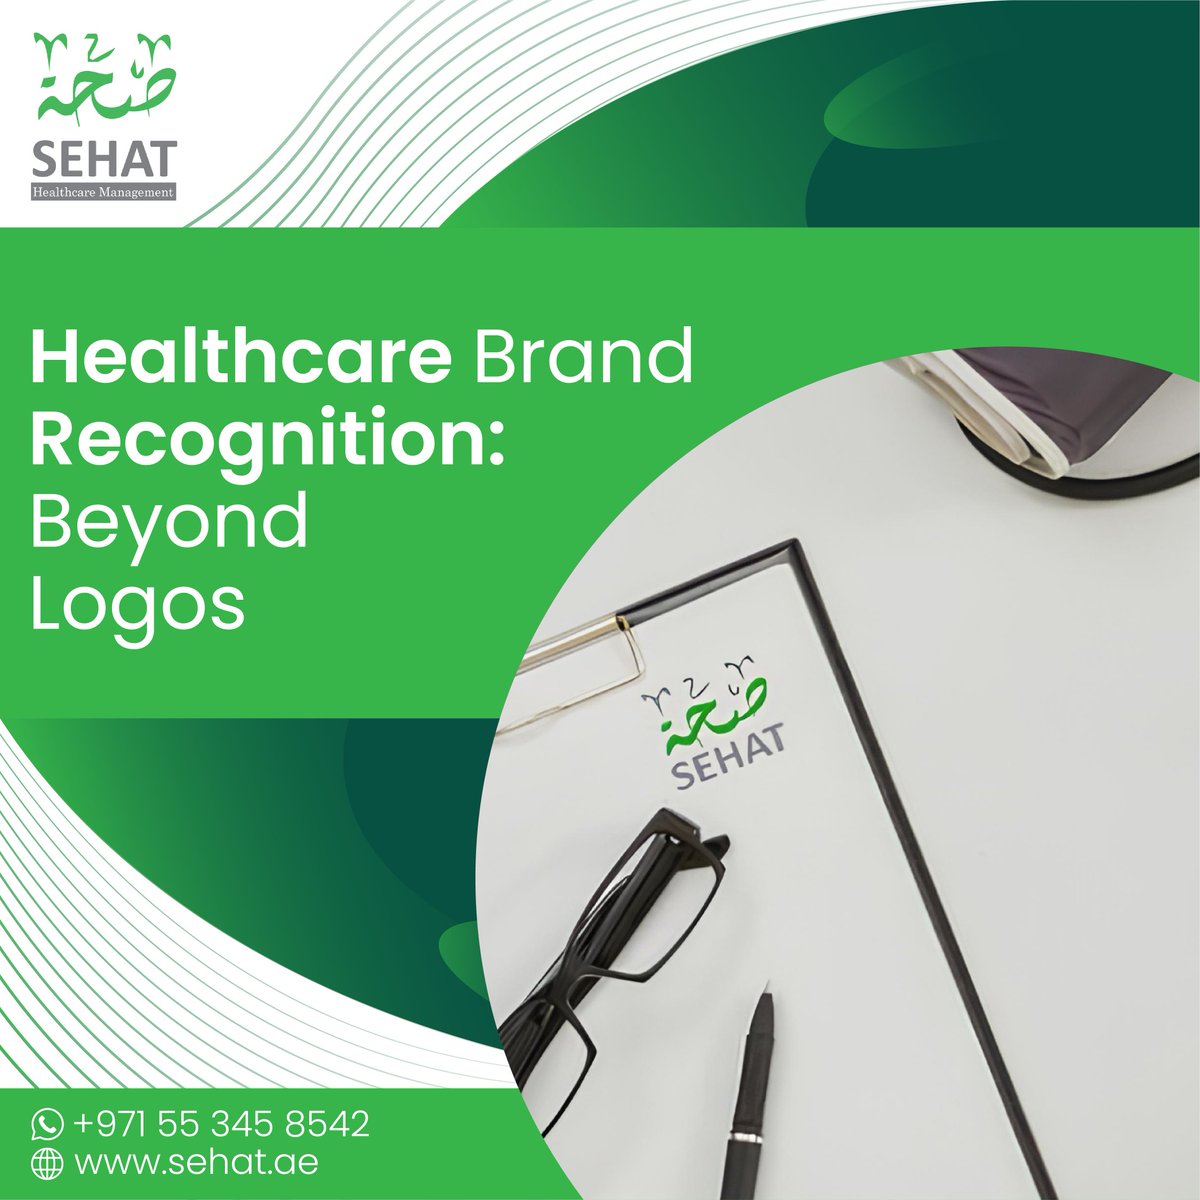 We believe in holistic Healthcare Brand Recognition. We go beyond logos, creating a comprehensive identity that resonates with your audience. 

Contact us today for an effective Healthcare Brand. 

#brandingdesigns #brandingservices #healthcarebranding #healthcarebusiness